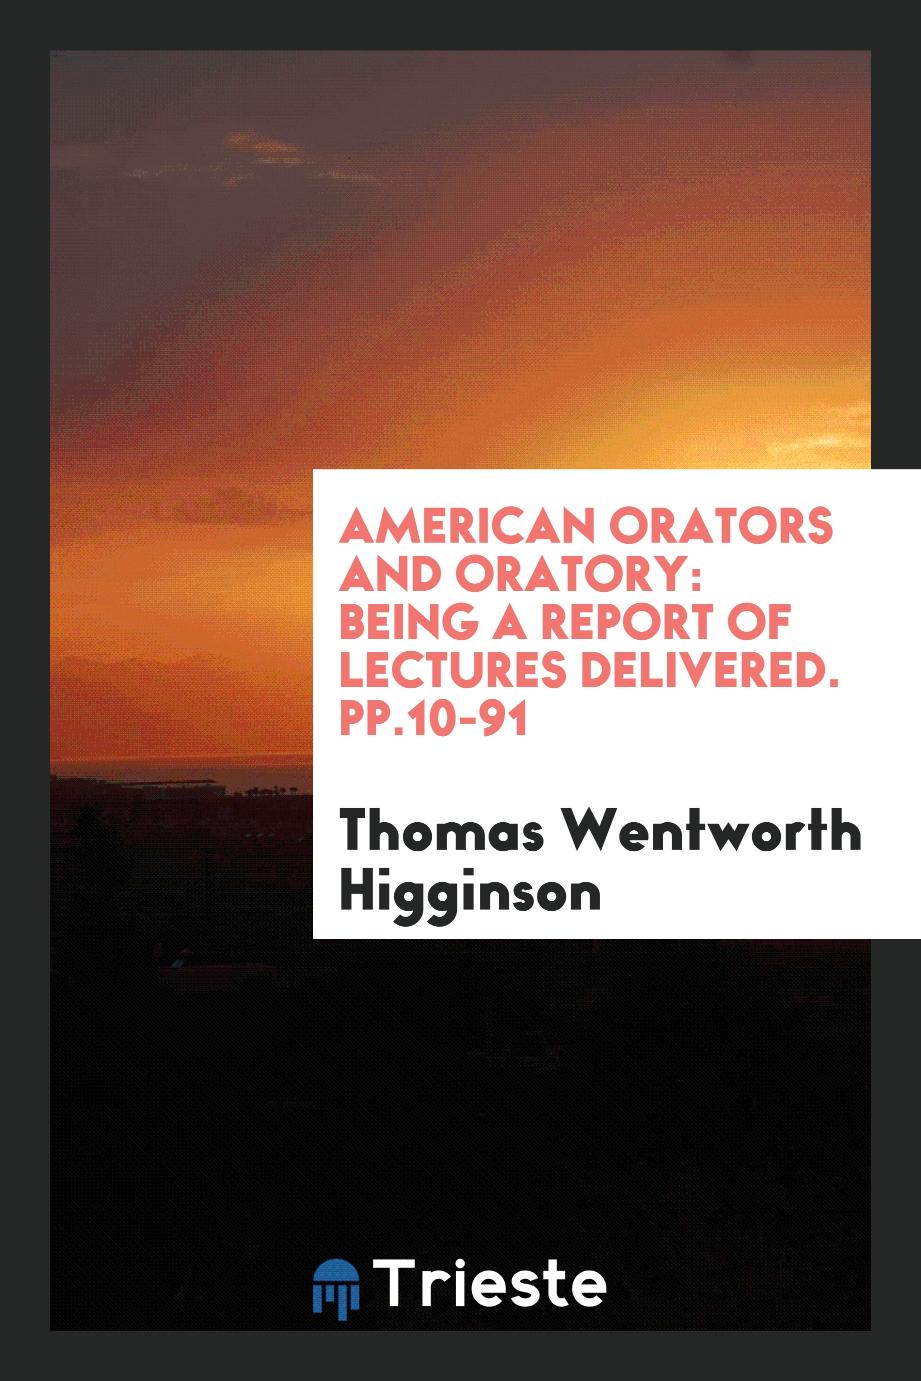 American Orators and Oratory: Being a Report of Lectures Delivered. pp.10-91